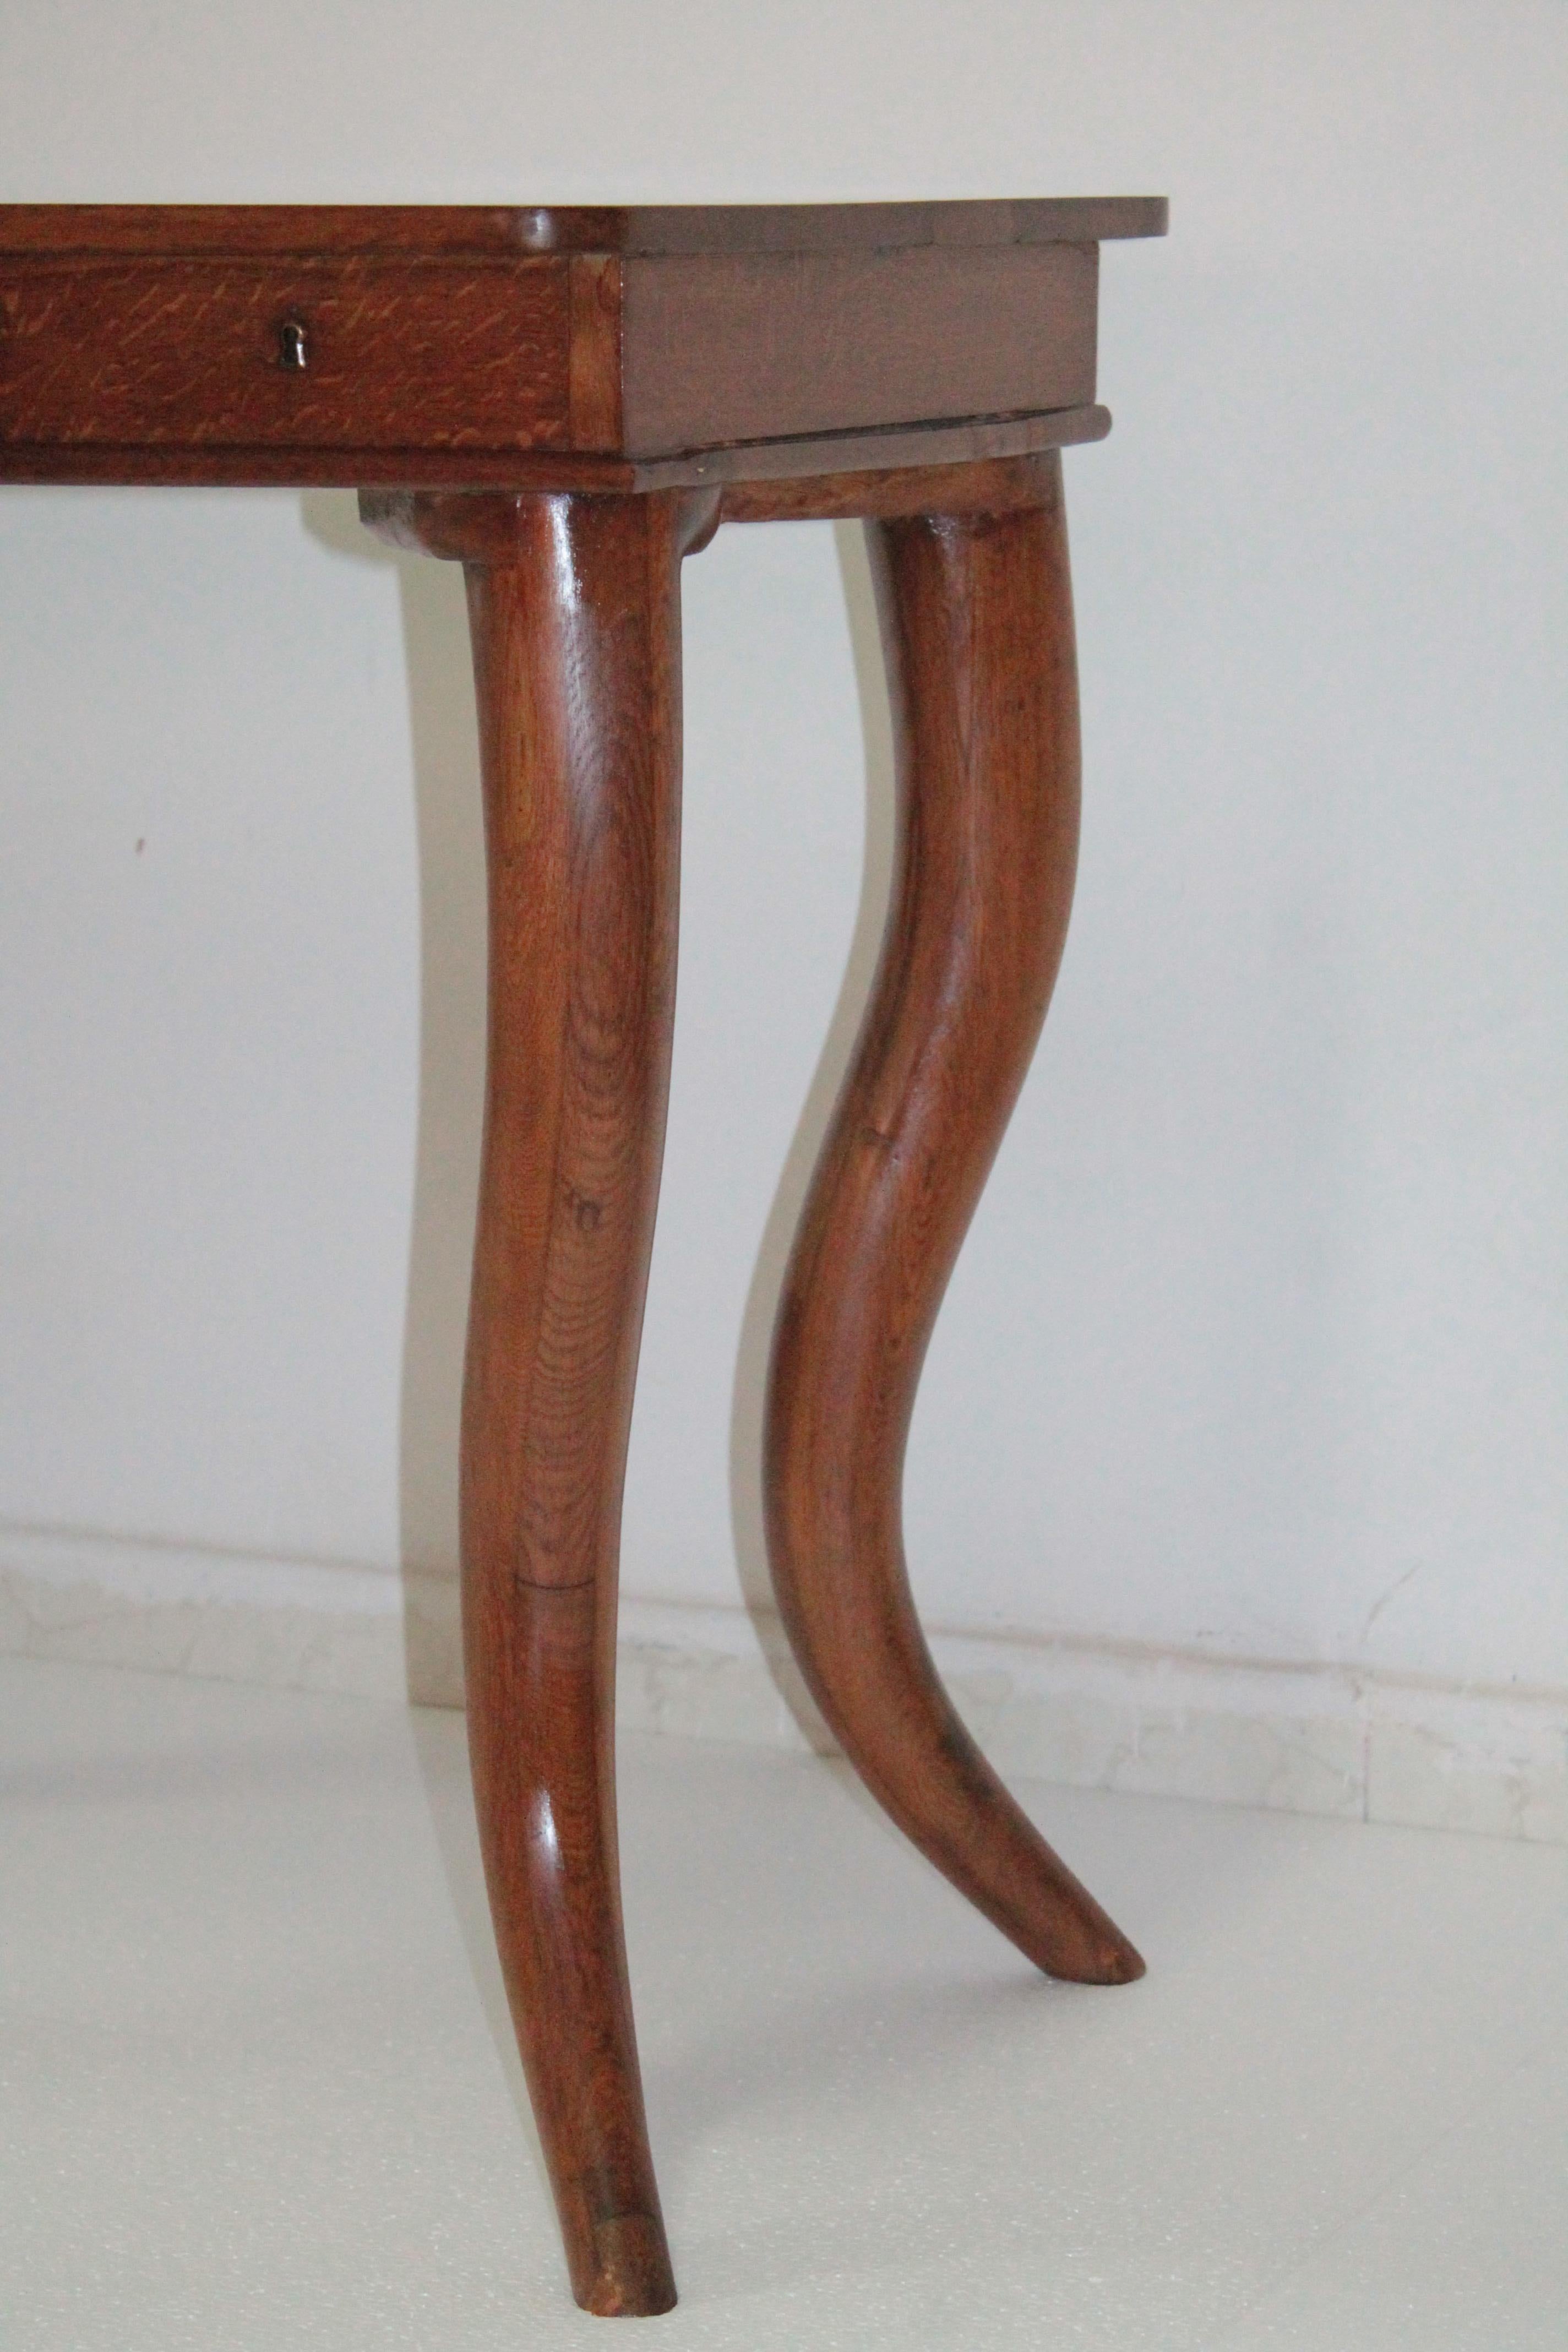 Art Deco Italian Writing Desk 1940s Elm Wood Paolo Buffa Style In Good Condition For Sale In Palermo, Palermo